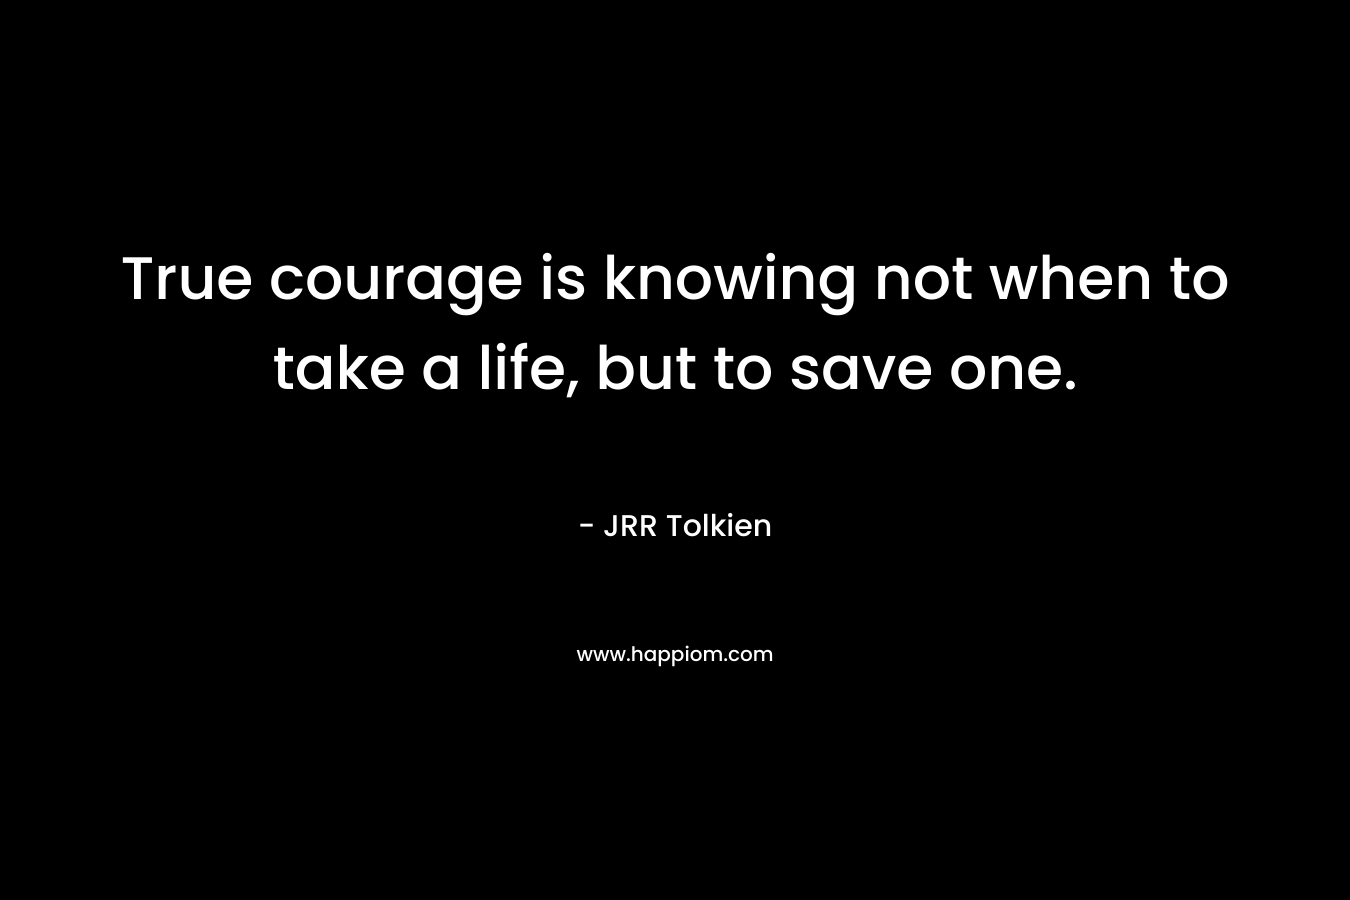 True courage is knowing not when to take a life, but to save one.